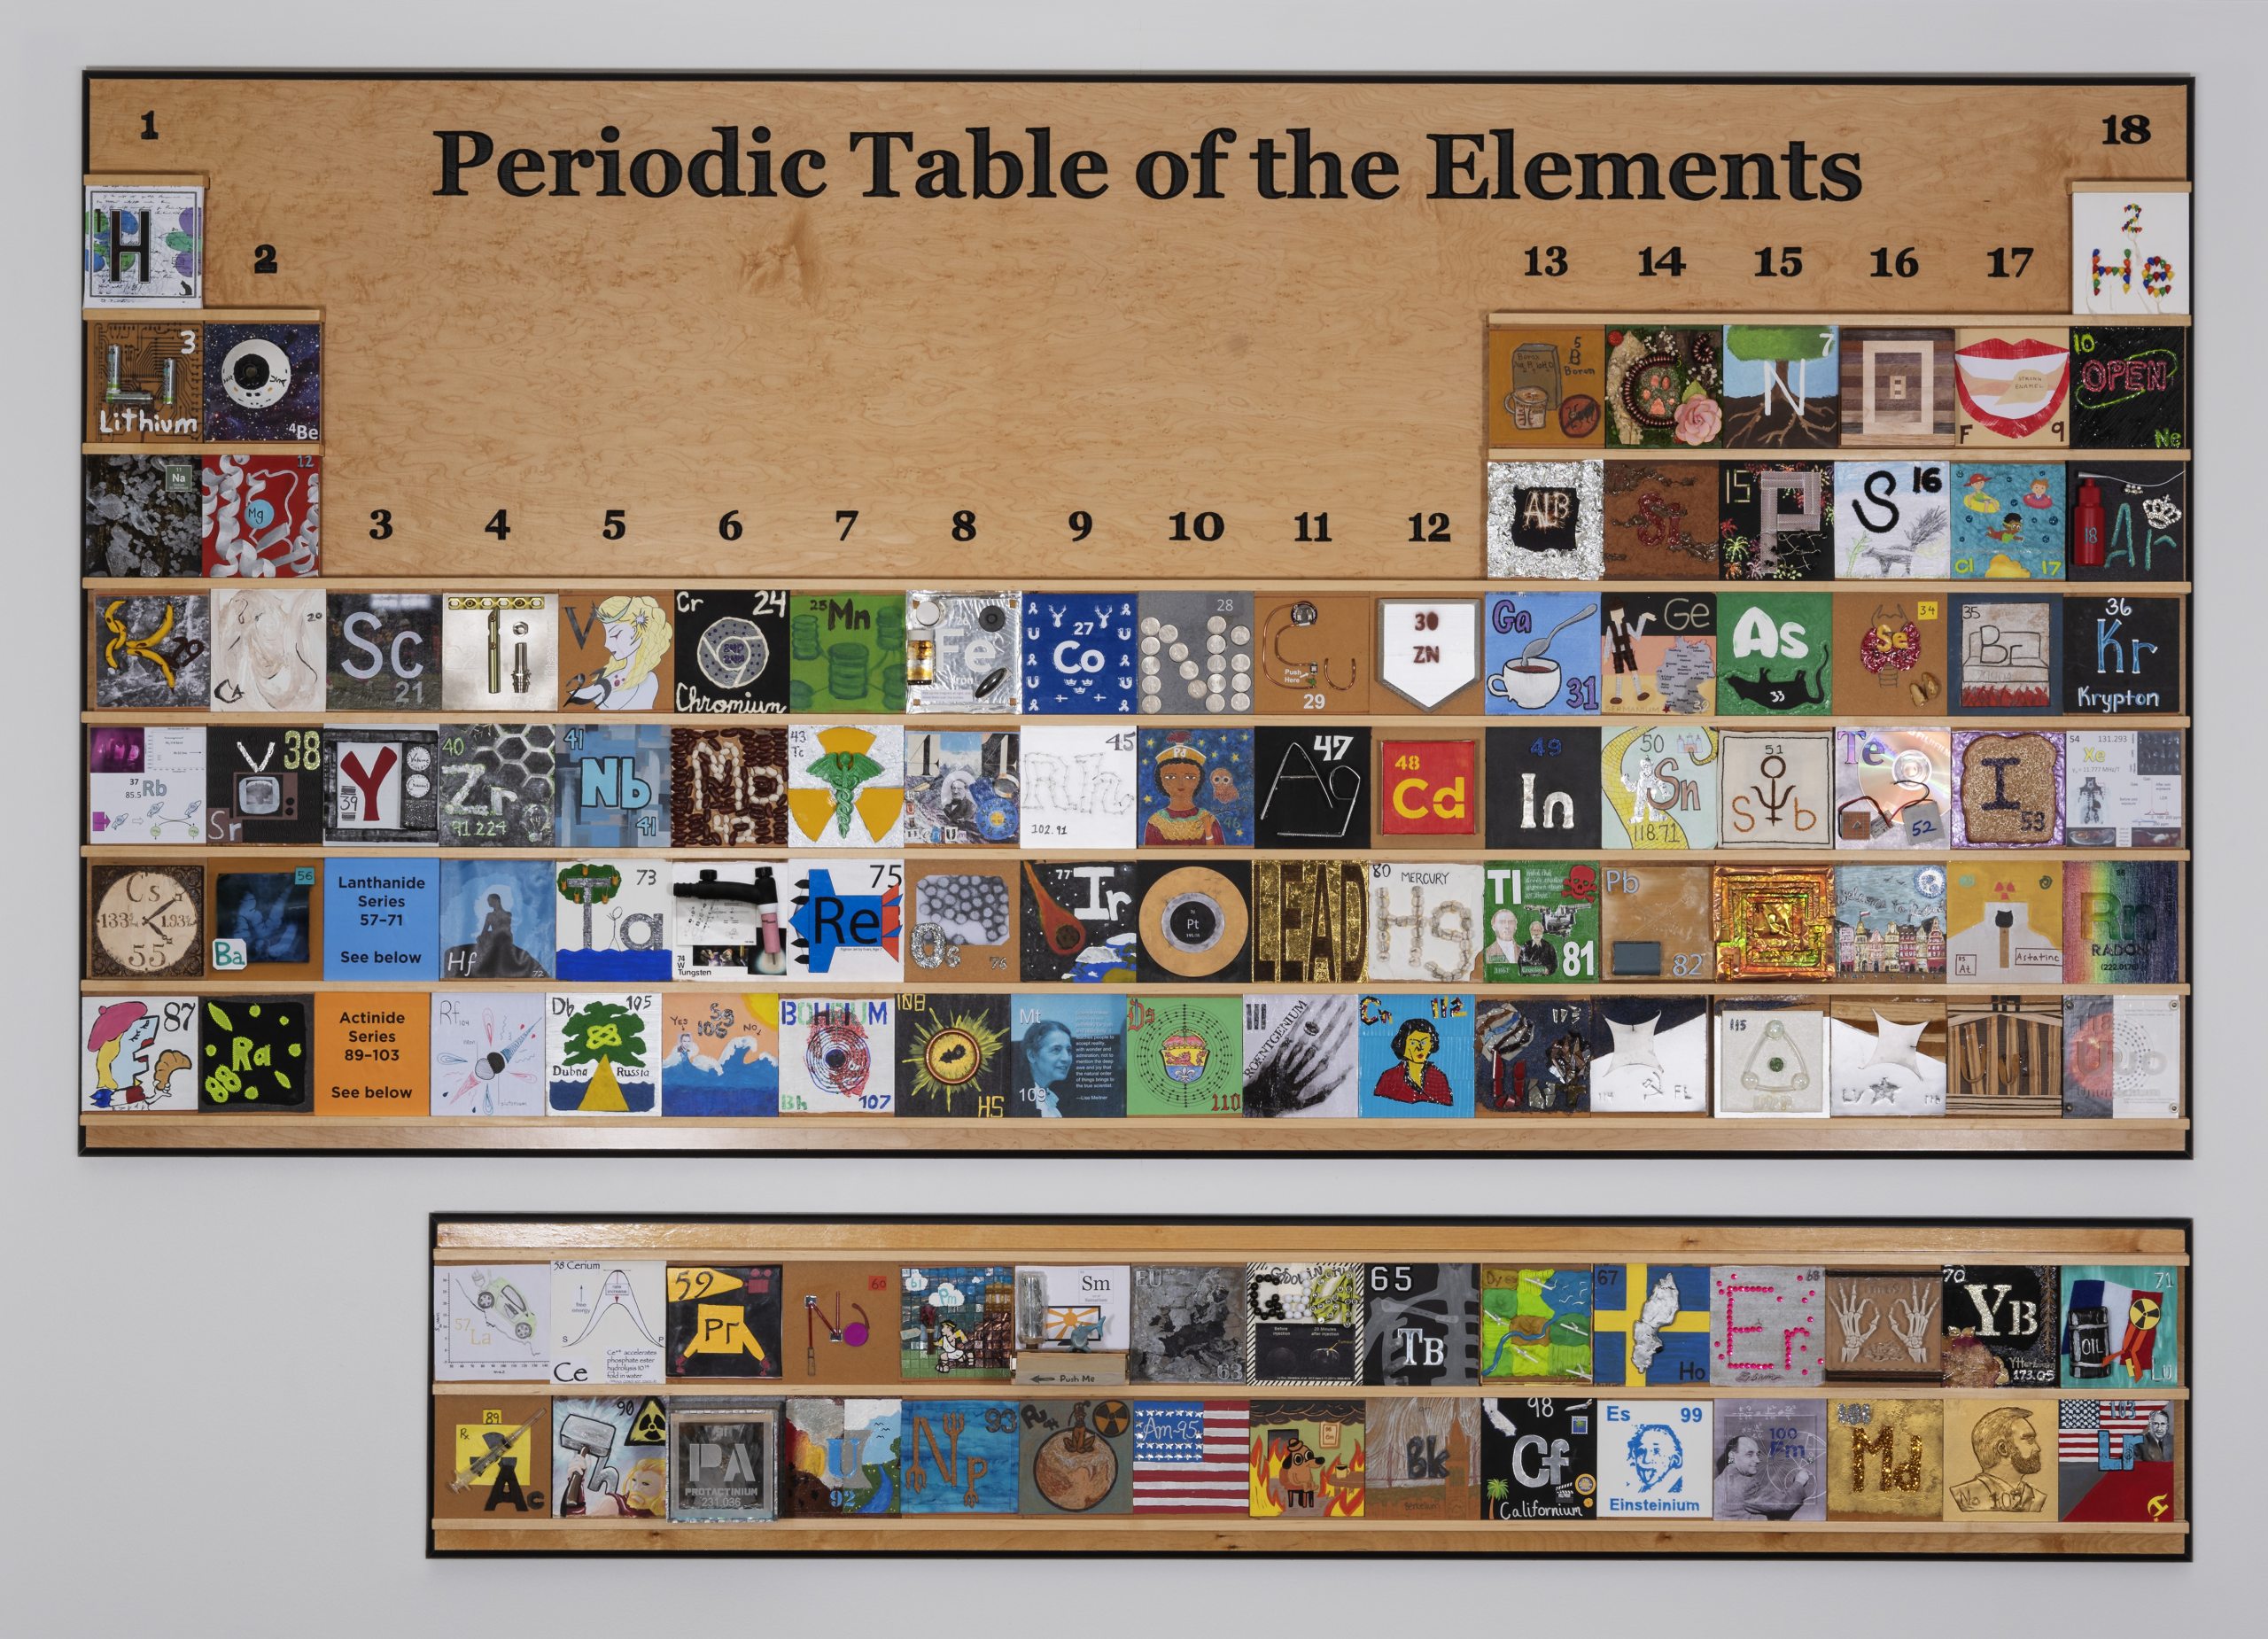 The periodic table of elements that hangs in U.N.C.'s Kenan Science Library.